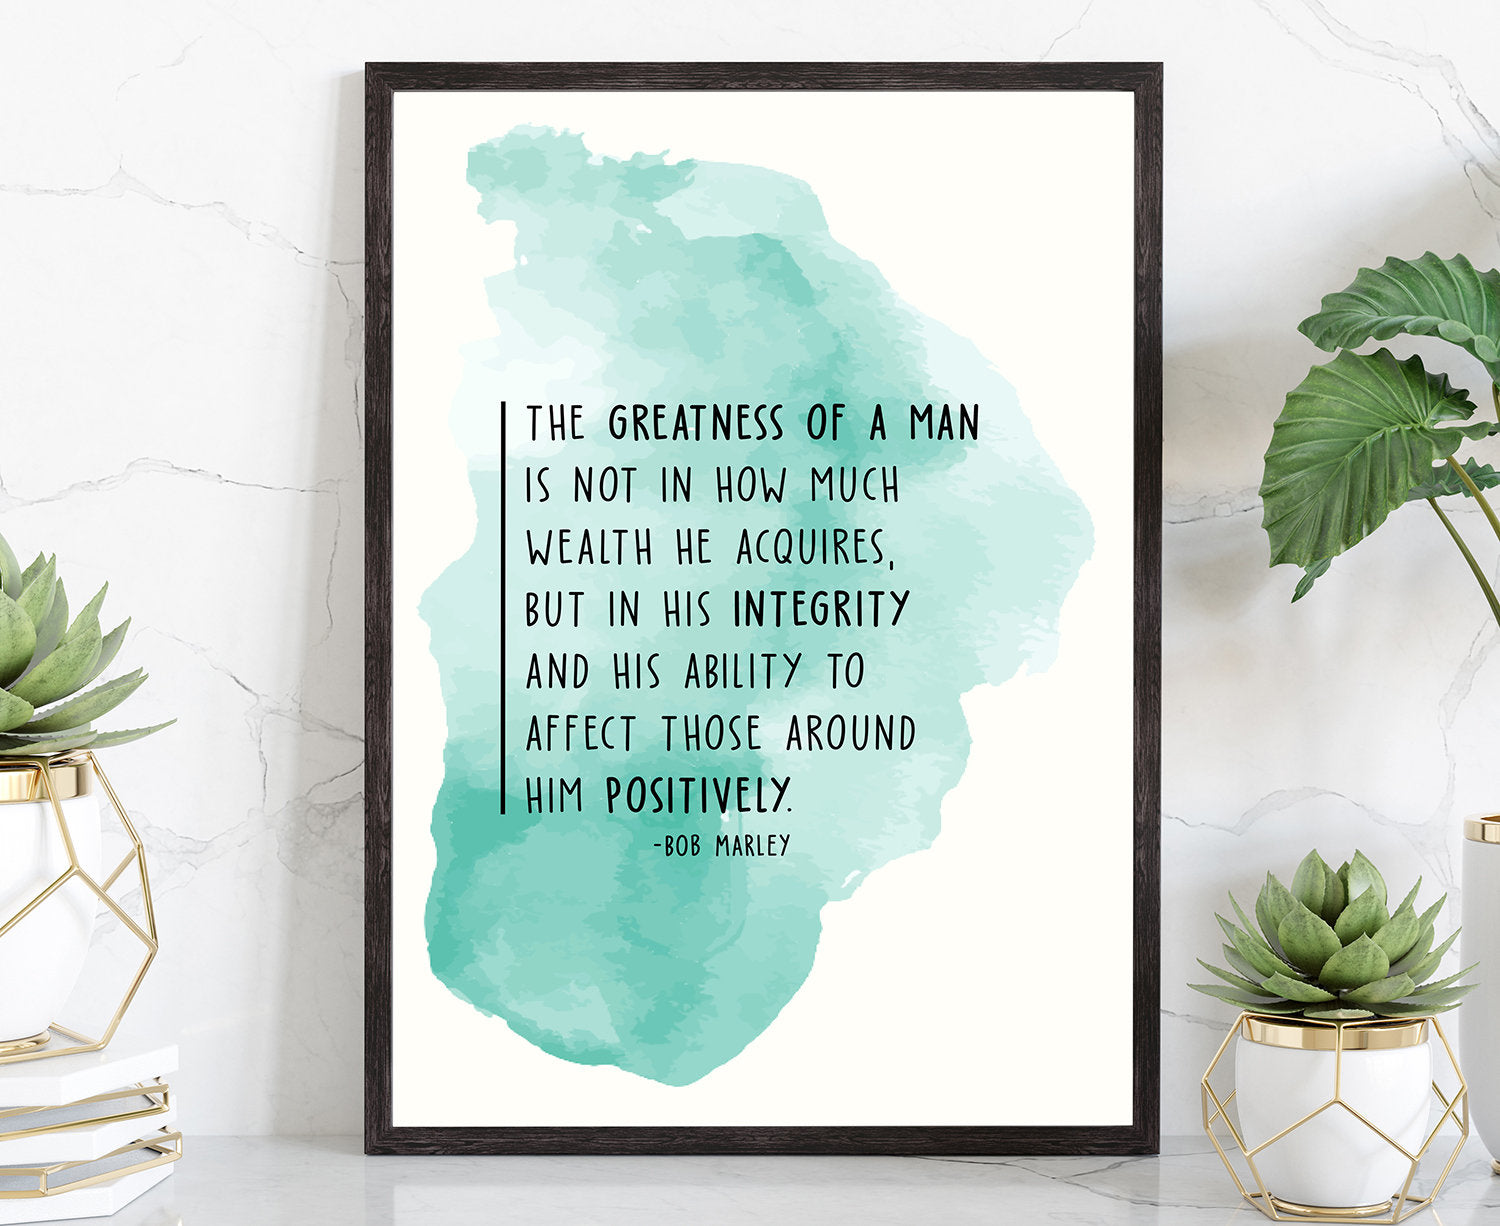 The Greatness of a Man..Bob marley quote,Home decor wall art,Quote poster Print, Office wall art,Living room wall decor,Dorm wall art,POSTER